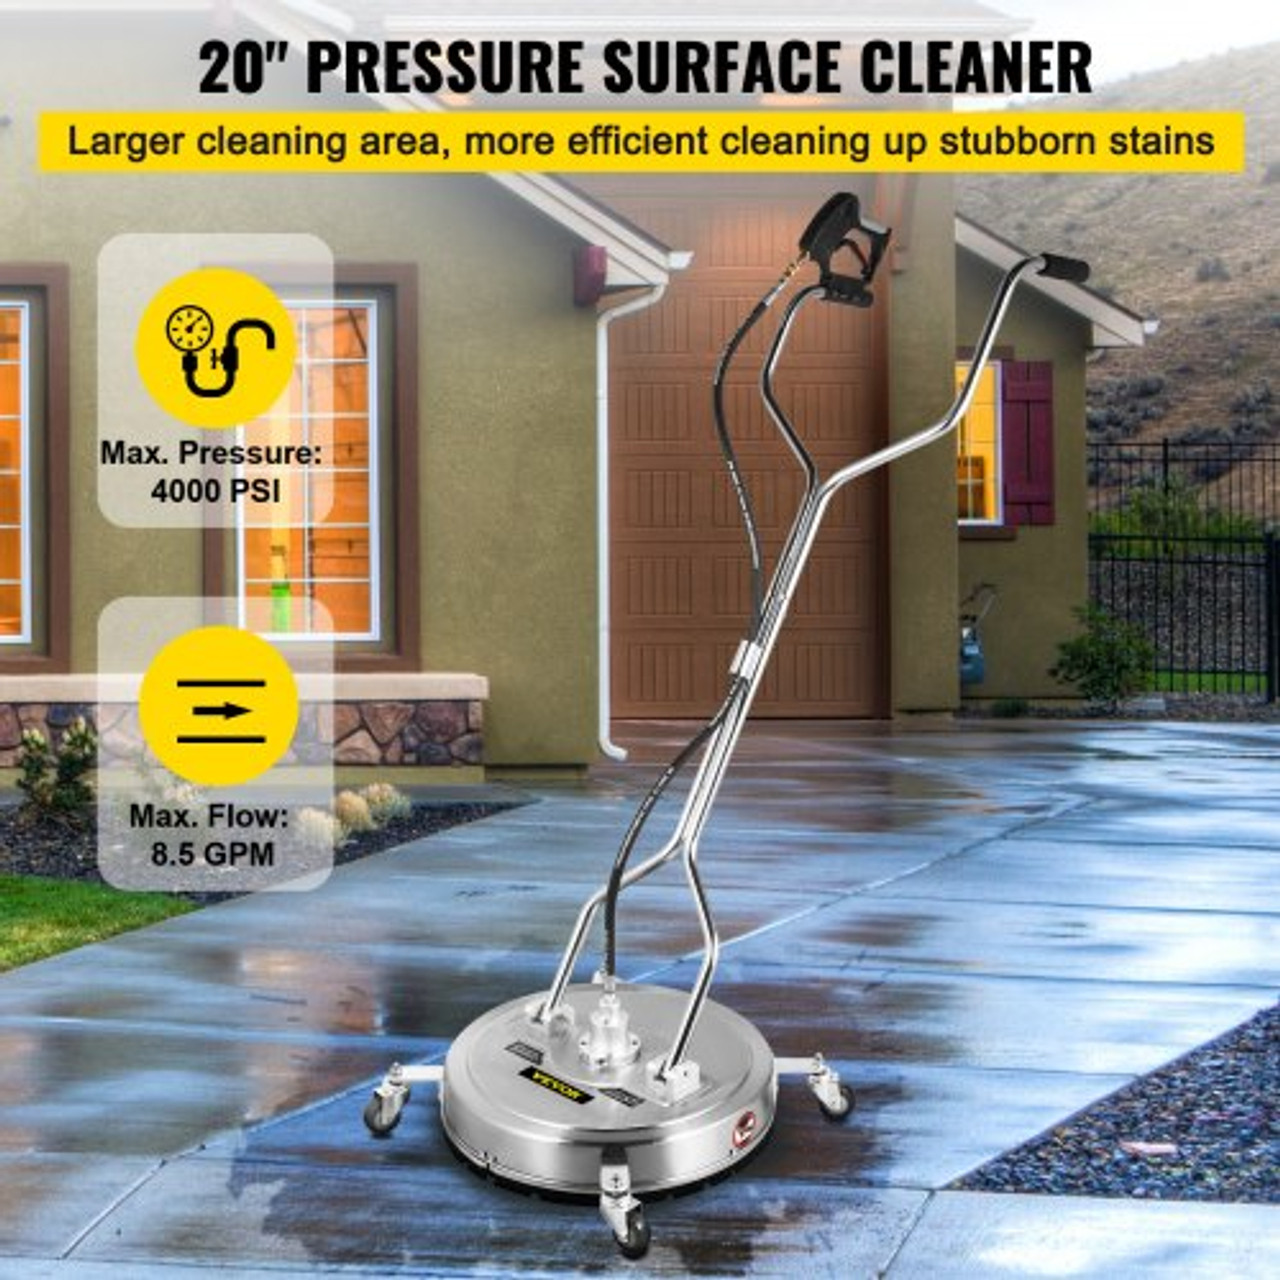 Pressure Washer Surface Cleaner, 20'', Max. 4000 PSI Pressure by 2 Nozzles for Cleaning Driveways, Sidewalks, Stainless Steel Frame w/Rotating Dual Handle, Wheels, Fit for 3/8'' Quick Connector